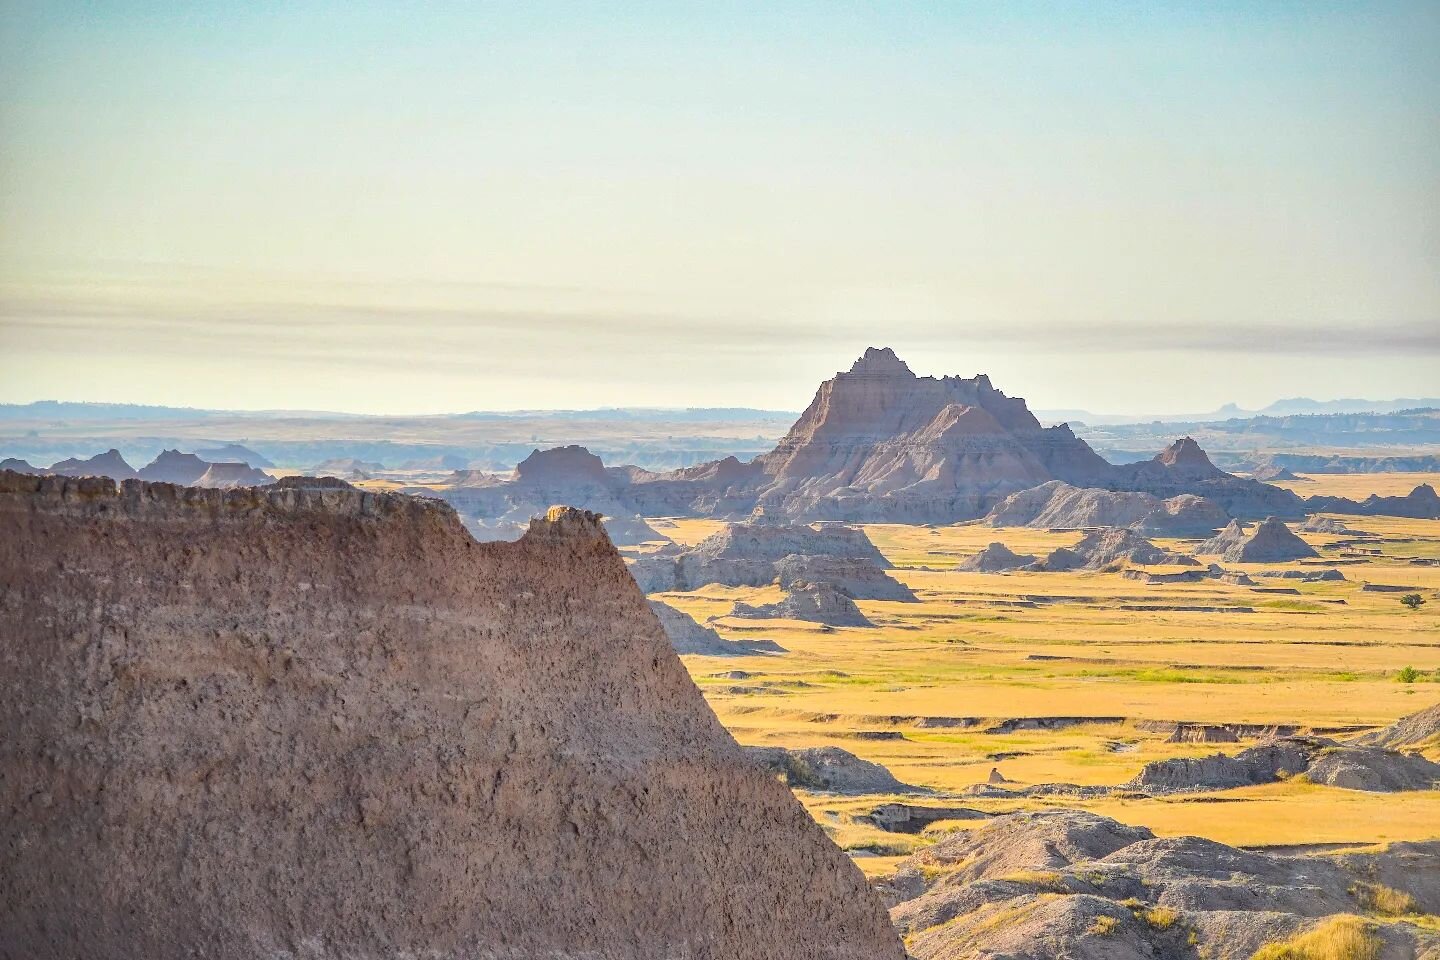 Mornings in badlands national park, South dakota 

Another destination near sturgis for beautiful riding and wildlife. 

Carved by the Cheyenne and white rivers.  Erosion began 500,000 years ago.  Seeing geological layers  displayed like this is like